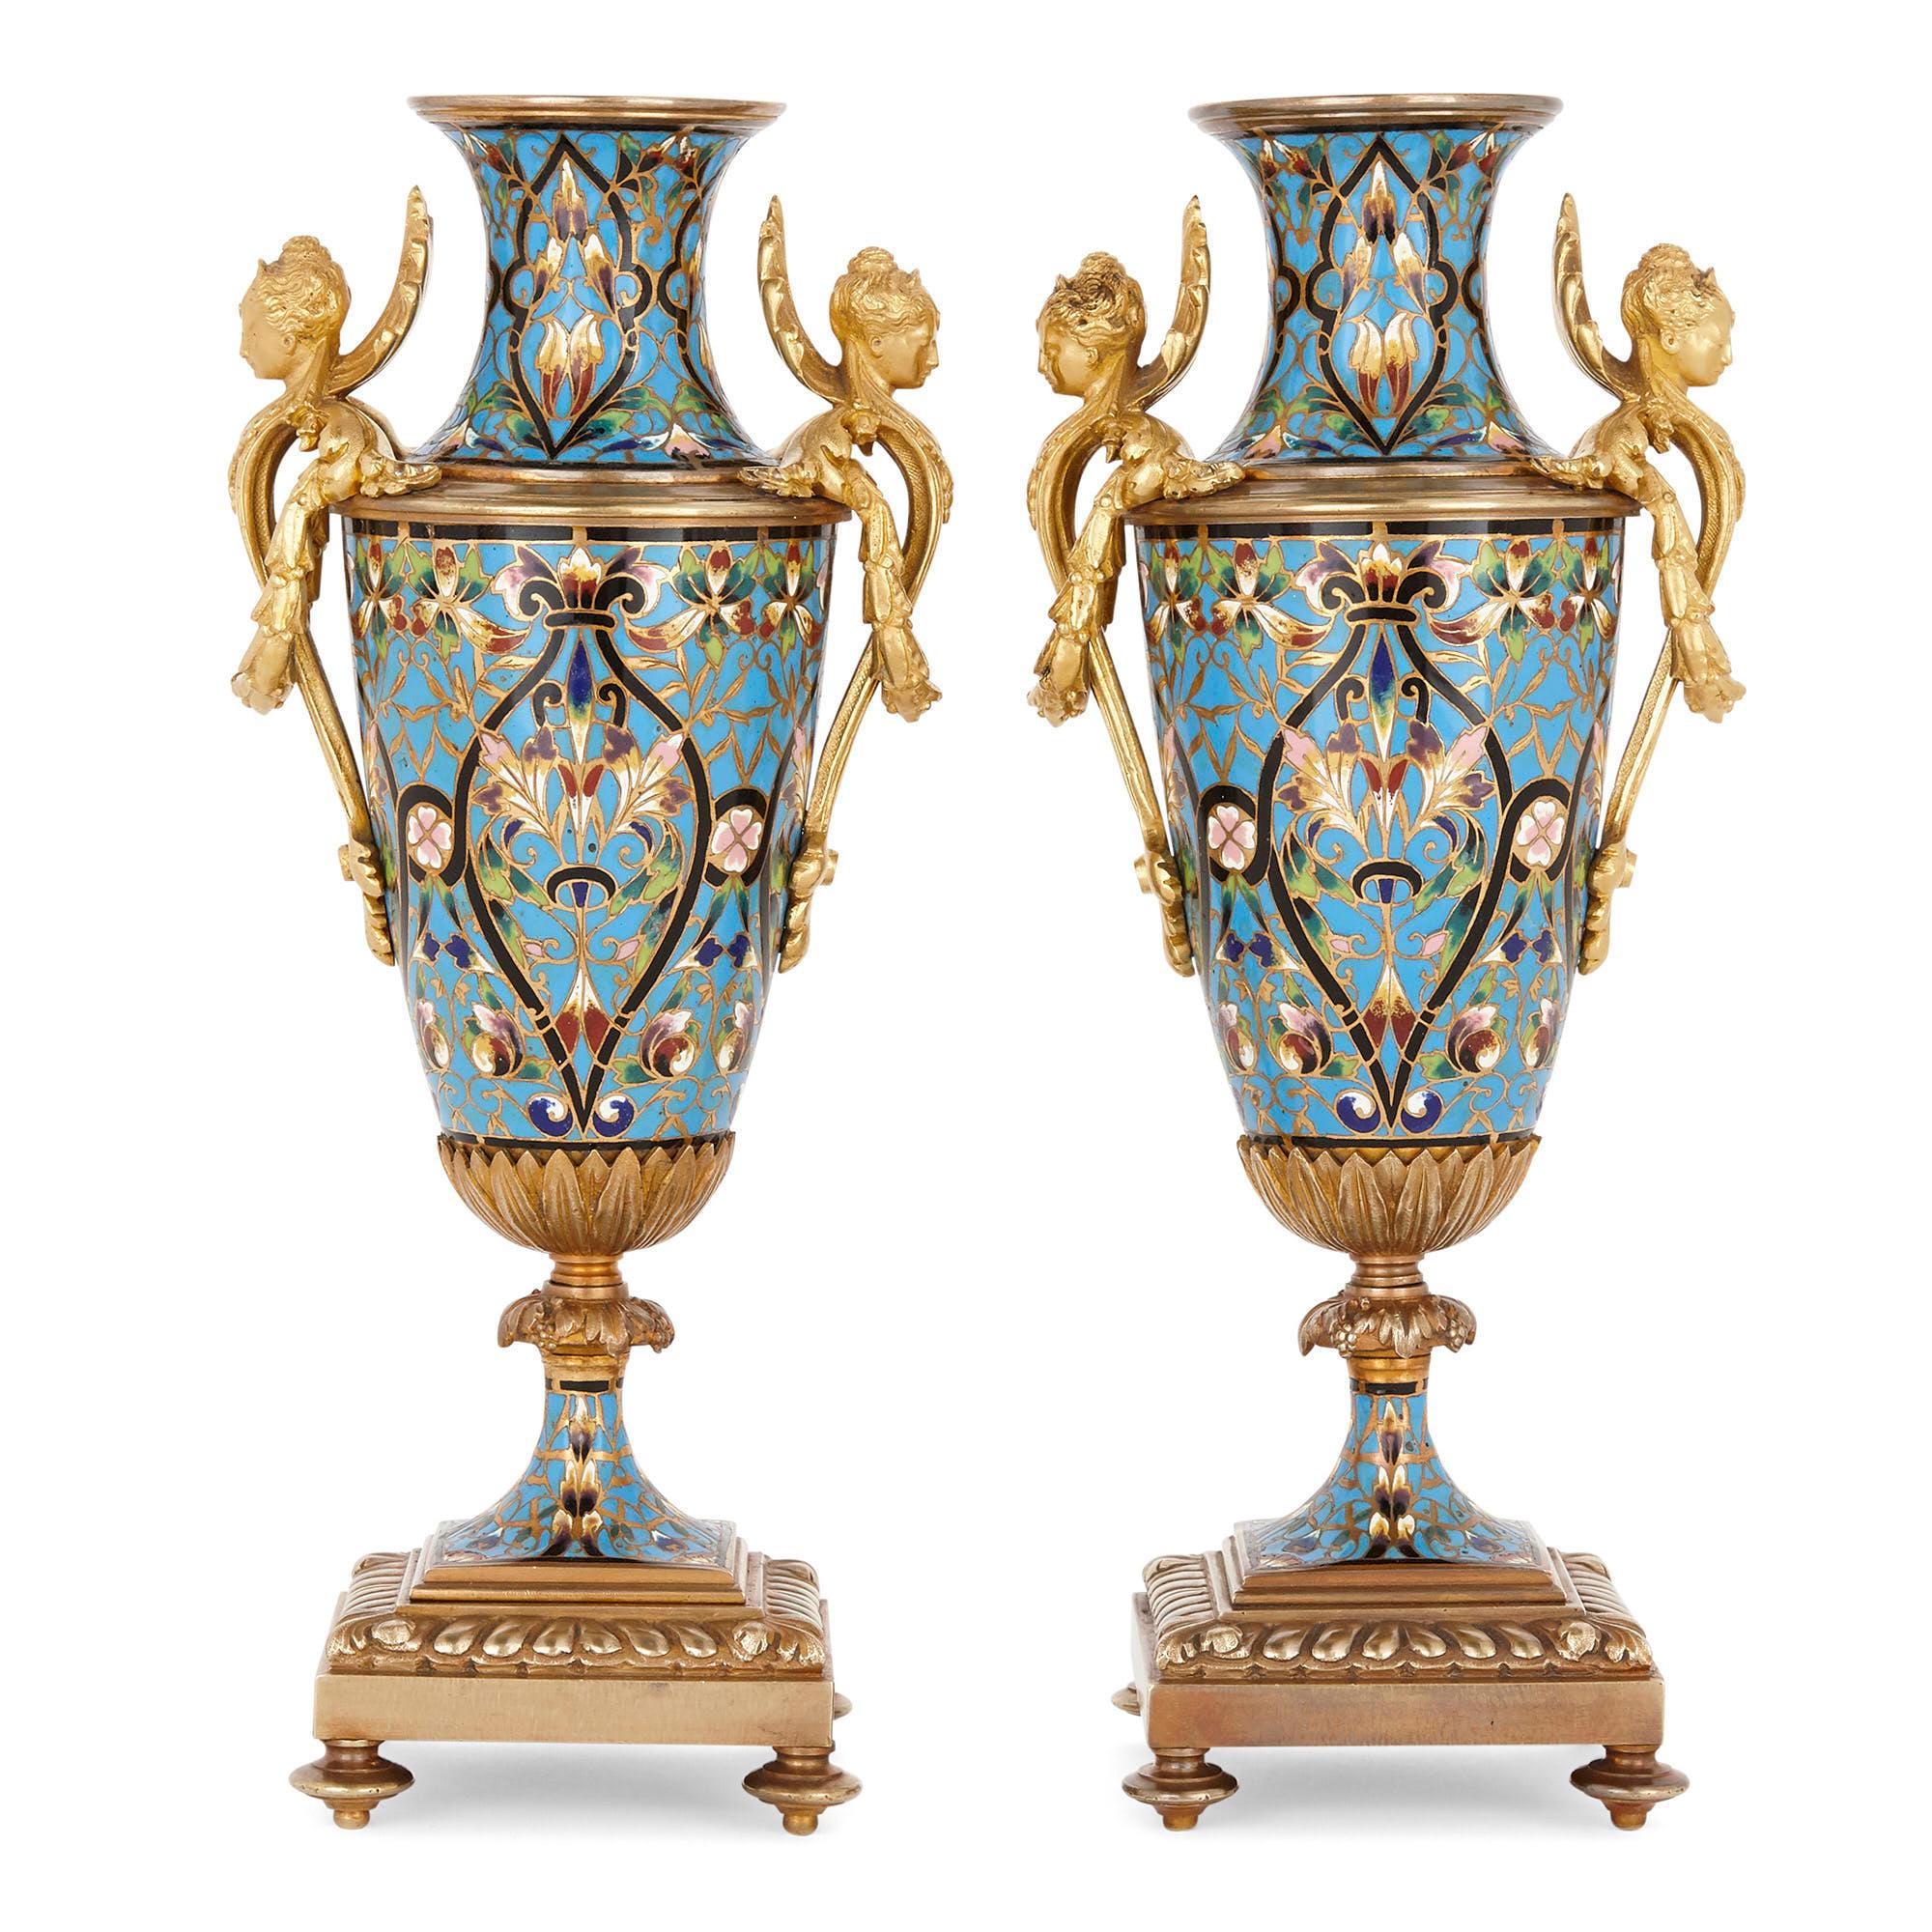 This magnificent pair of vases is wrought from gilt bronze and champlevé enamel in the distinctive, visually striking Renaissance Revival style. The cylindrical body of each vase is profusely adorned with champlevé enamel, the enamel fashioned into